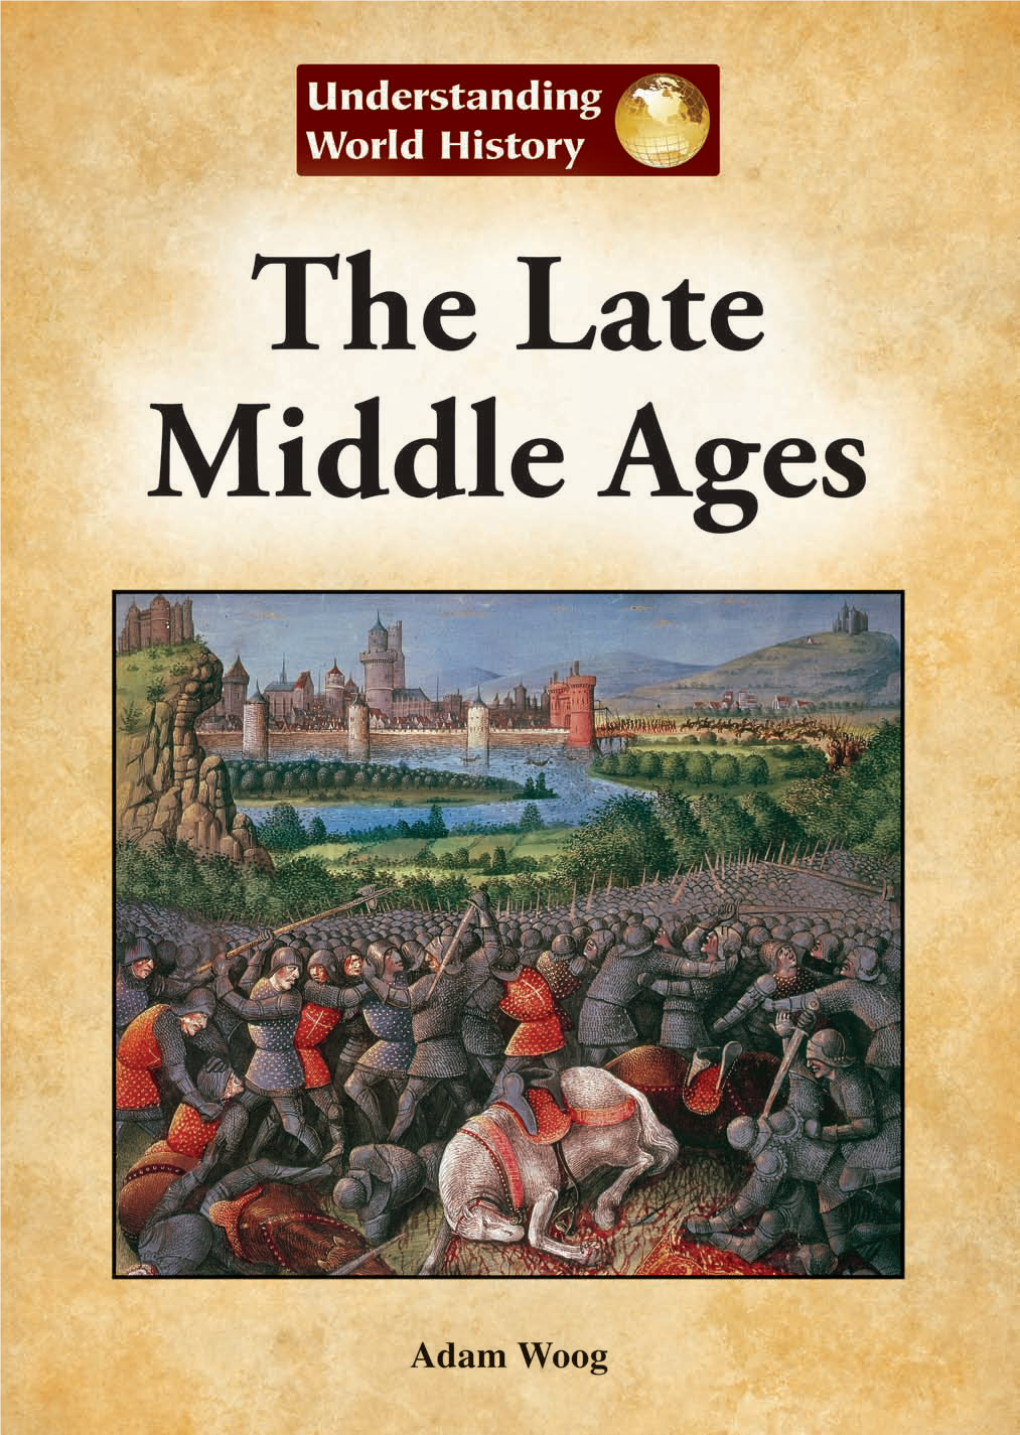 The Era Known As the Late Middle Ages Was a Period of Momen